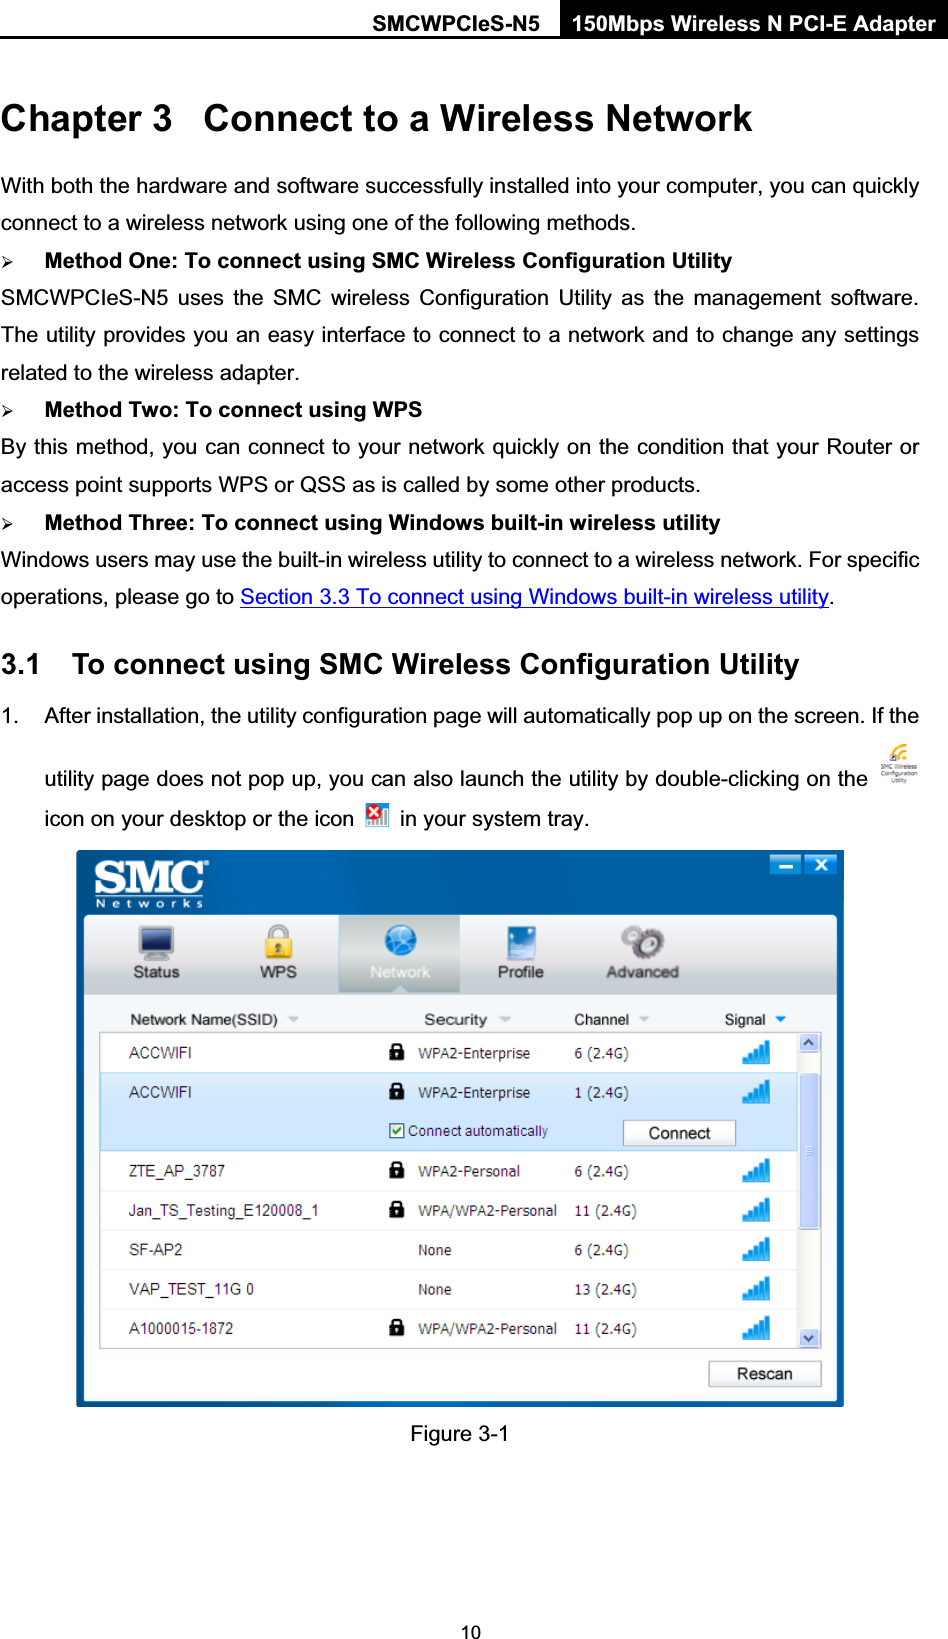 SMCWPCIeS-N5  150Mbps Wireless N PCI-E Adapter  10Chapter 3  Connect to a Wireless Network With both the hardware and software successfully installed into your computer, you can quickly connect to a wireless network using one of the following methods. ¾ Method One: To connect using SMC Wireless Configuration Utility SMCWPCIeS-N5 uses the SMC wireless Configuration Utility as the management software. The utility provides you an easy interface to connect to a network and to change any settings related to the wireless adapter.   ¾ Method Two: To connect using WPS By this method, you can connect to your network quickly on the condition that your Router or access point supports WPS or QSS as is called by some other products.   ¾ Method Three: To connect using Windows built-in wireless utility Windows users may use the built-in wireless utility to connect to a wireless network. For specific operations, please go to Section 3.3 To connect using Windows built-in wireless utility. 3.1  To connect using SMC Wireless Configuration Utility 1.  After installation, the utility configuration page will automatically pop up on the screen. If the utility page does not pop up, you can also launch the utility by double-clicking on the   icon on your desktop or the icon    in your system tray.    Figure 3-1   